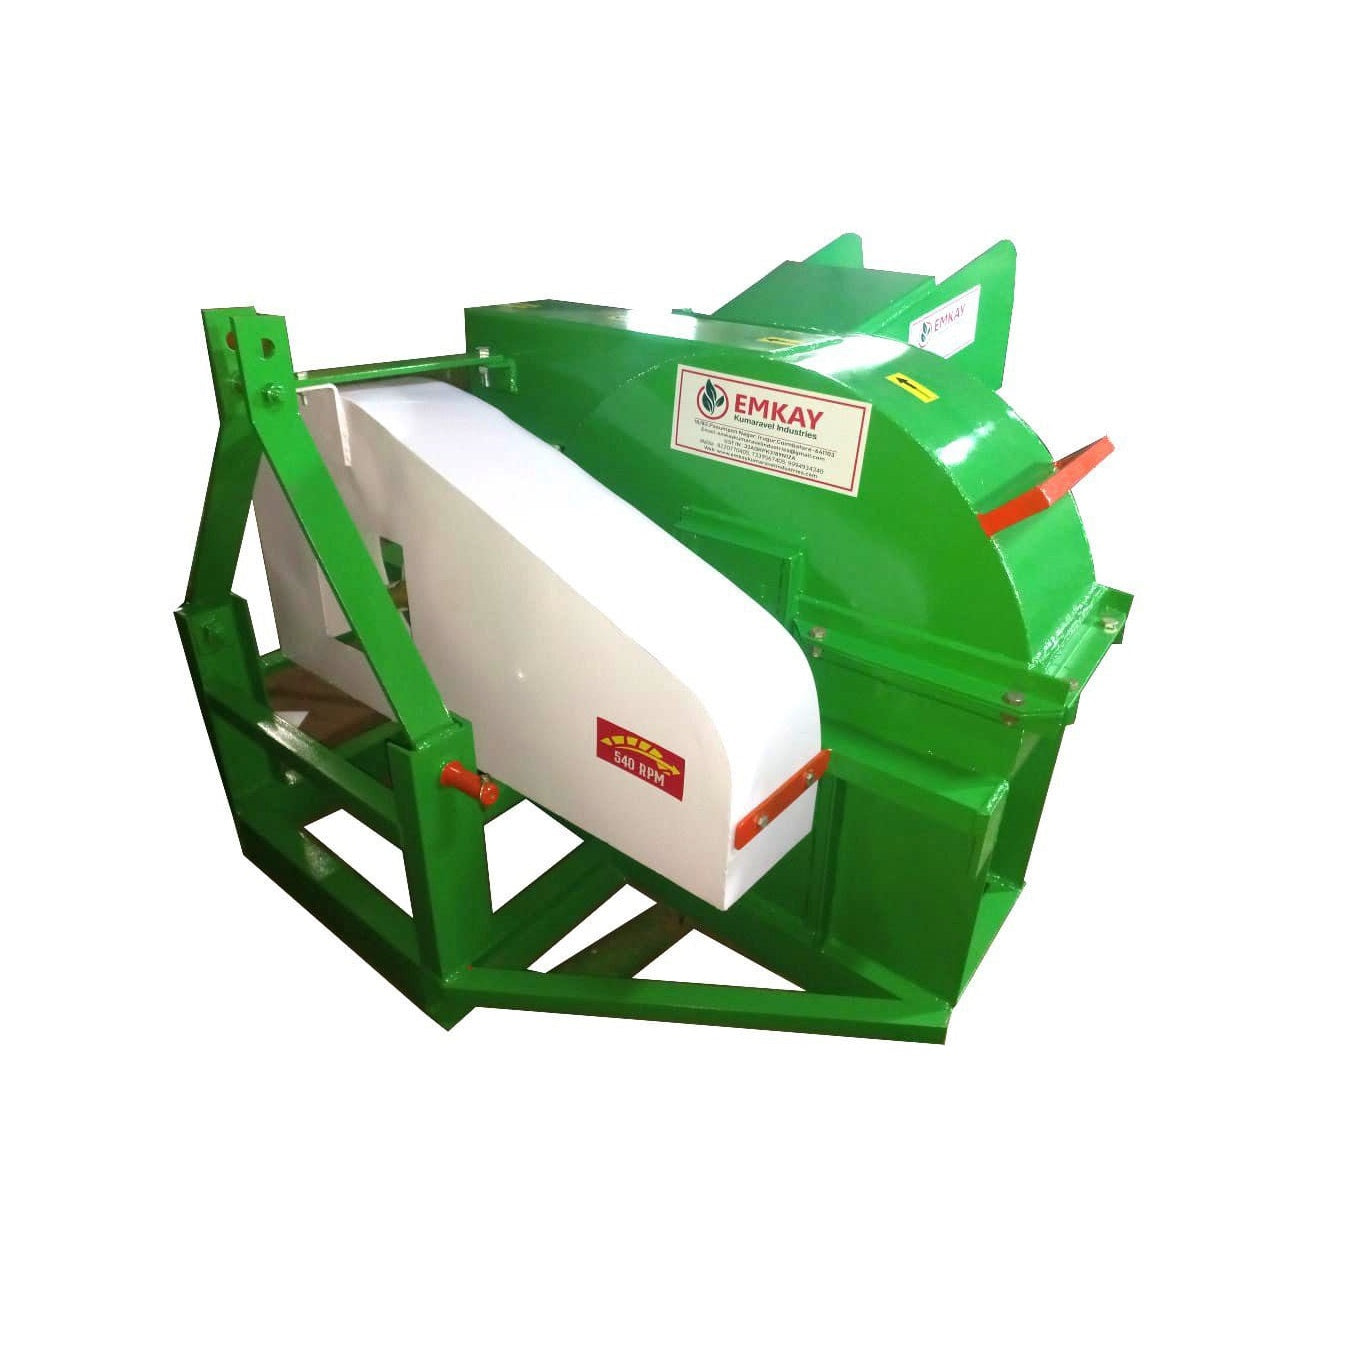 Emkay 45HP Shredder Tractor Operated With Pulverizer